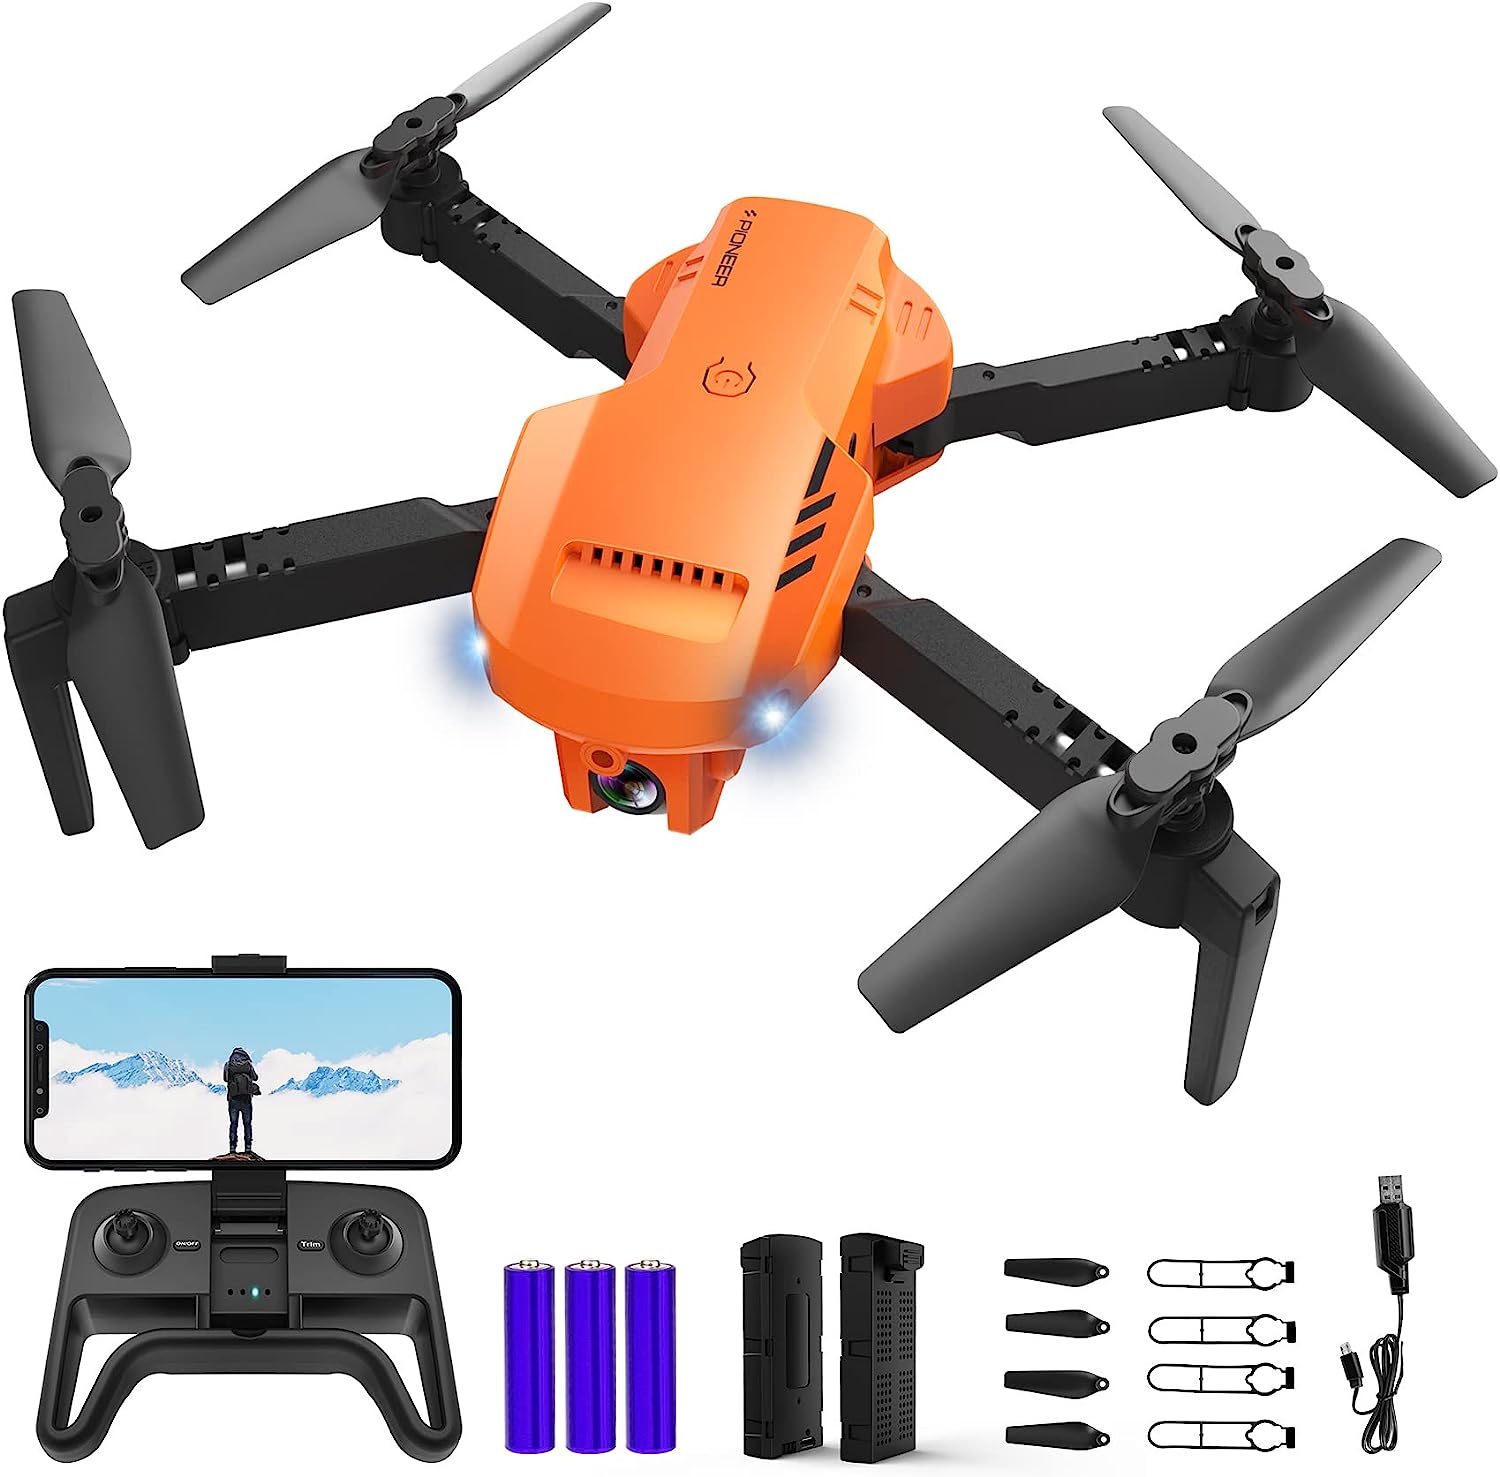 RADCLO Mini Drone with Camera – 1080P HD FPV Foldable Drone with Carrying Scenario, 2 Batteries, 90° Adjustable Lens, One Key Take Off/Land, Altitude Hold, 360° Flip, Toys Gifts for Kids and Adults